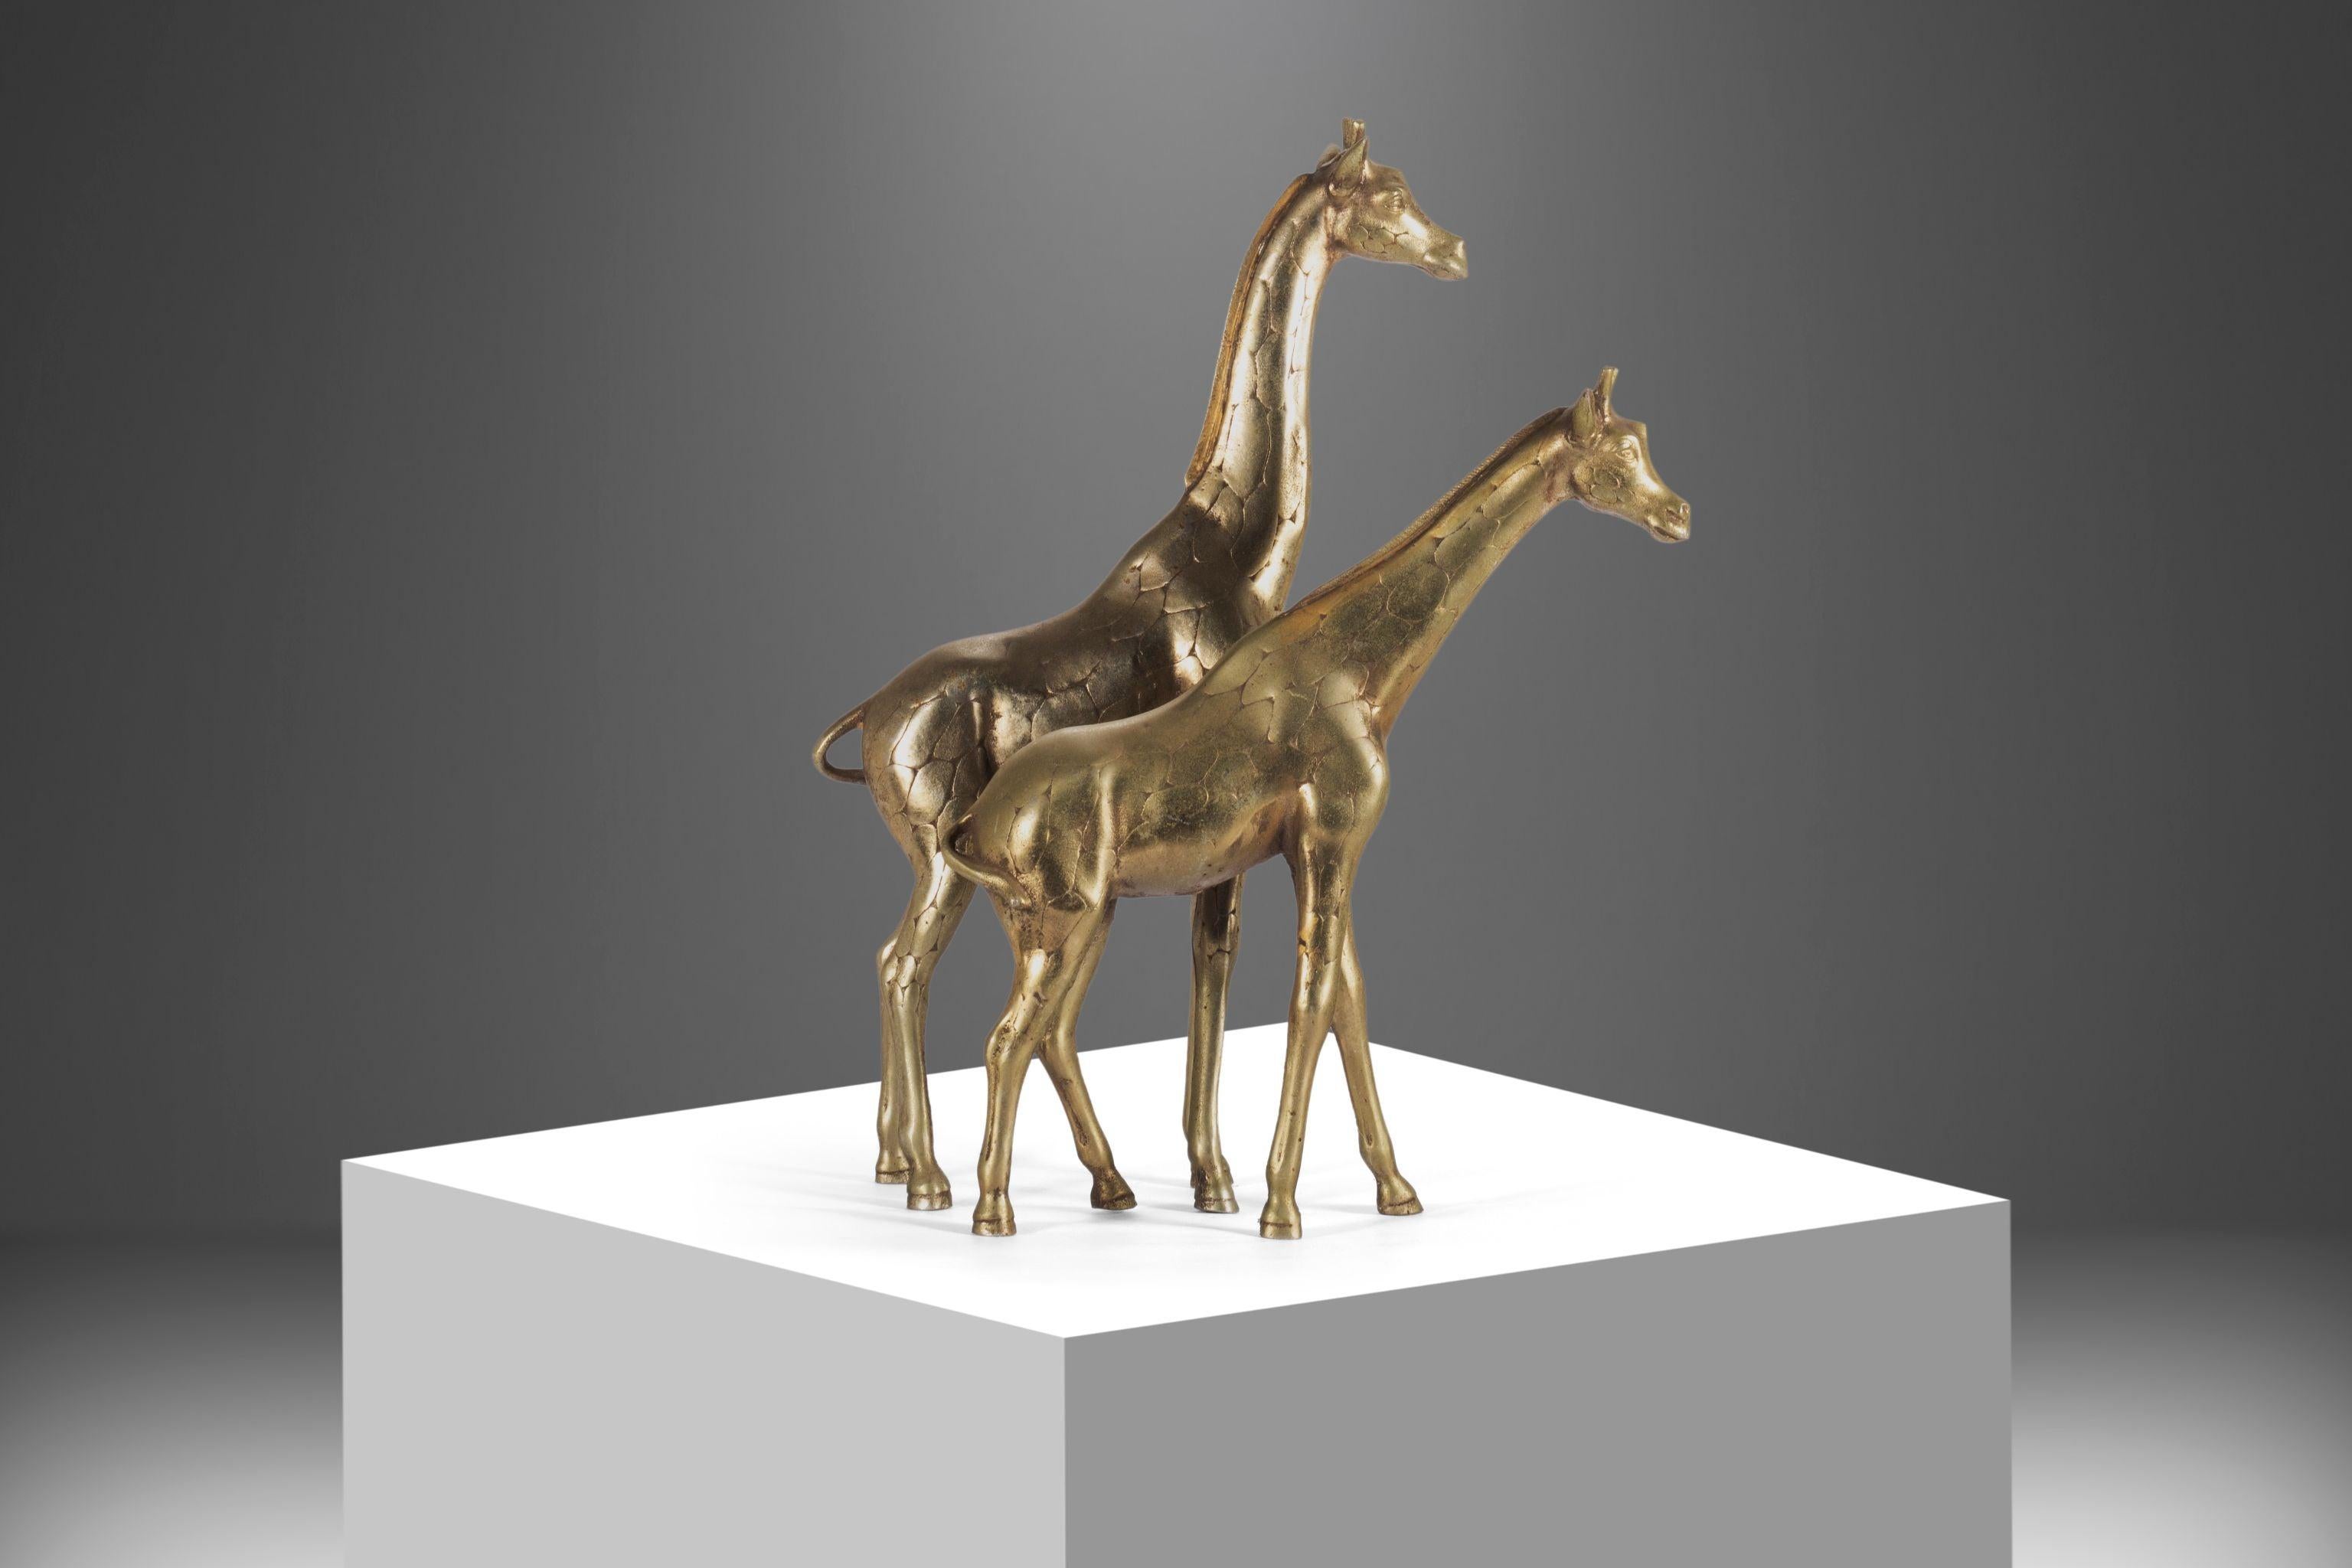 For your consideration a pair of large modernist solid brass giraffe floor statues / floor sculptures. These Hollywood Regency brass animal sculptures have great details and great shape of posing. The male has a long slightly bent neck and can be